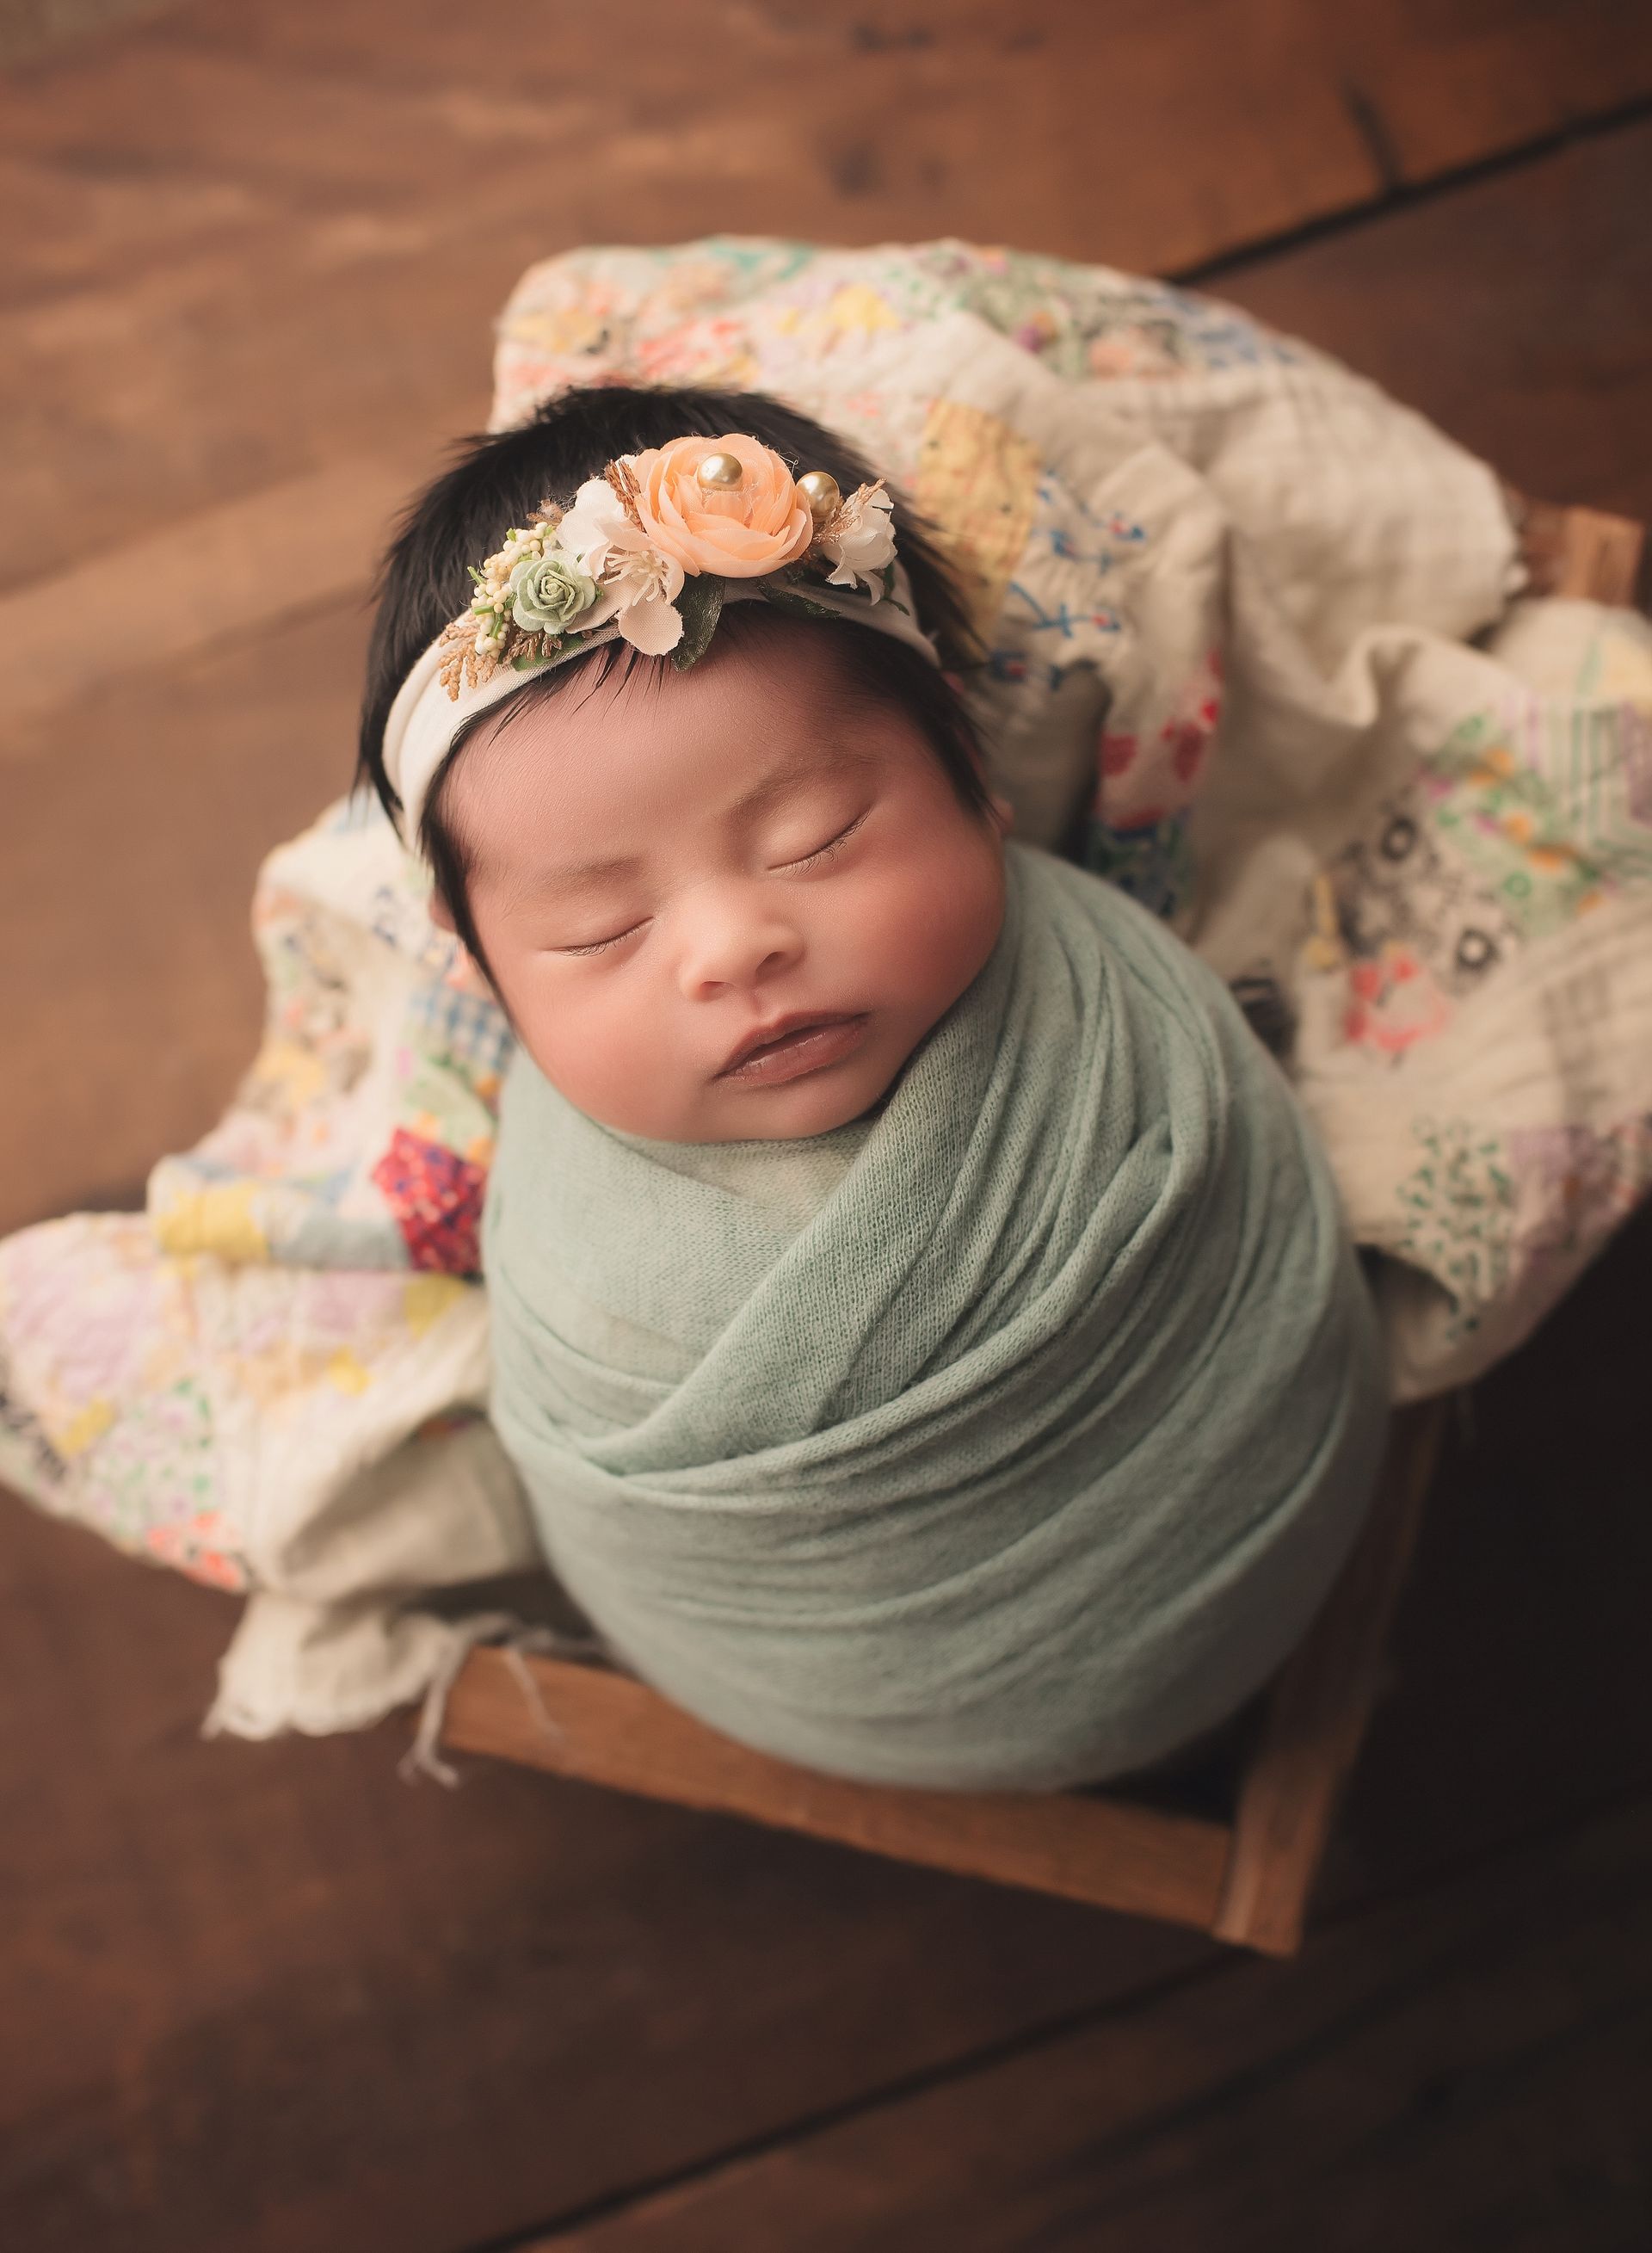 A newborn baby is wrapped in a green blanket and wearing a flower headband.